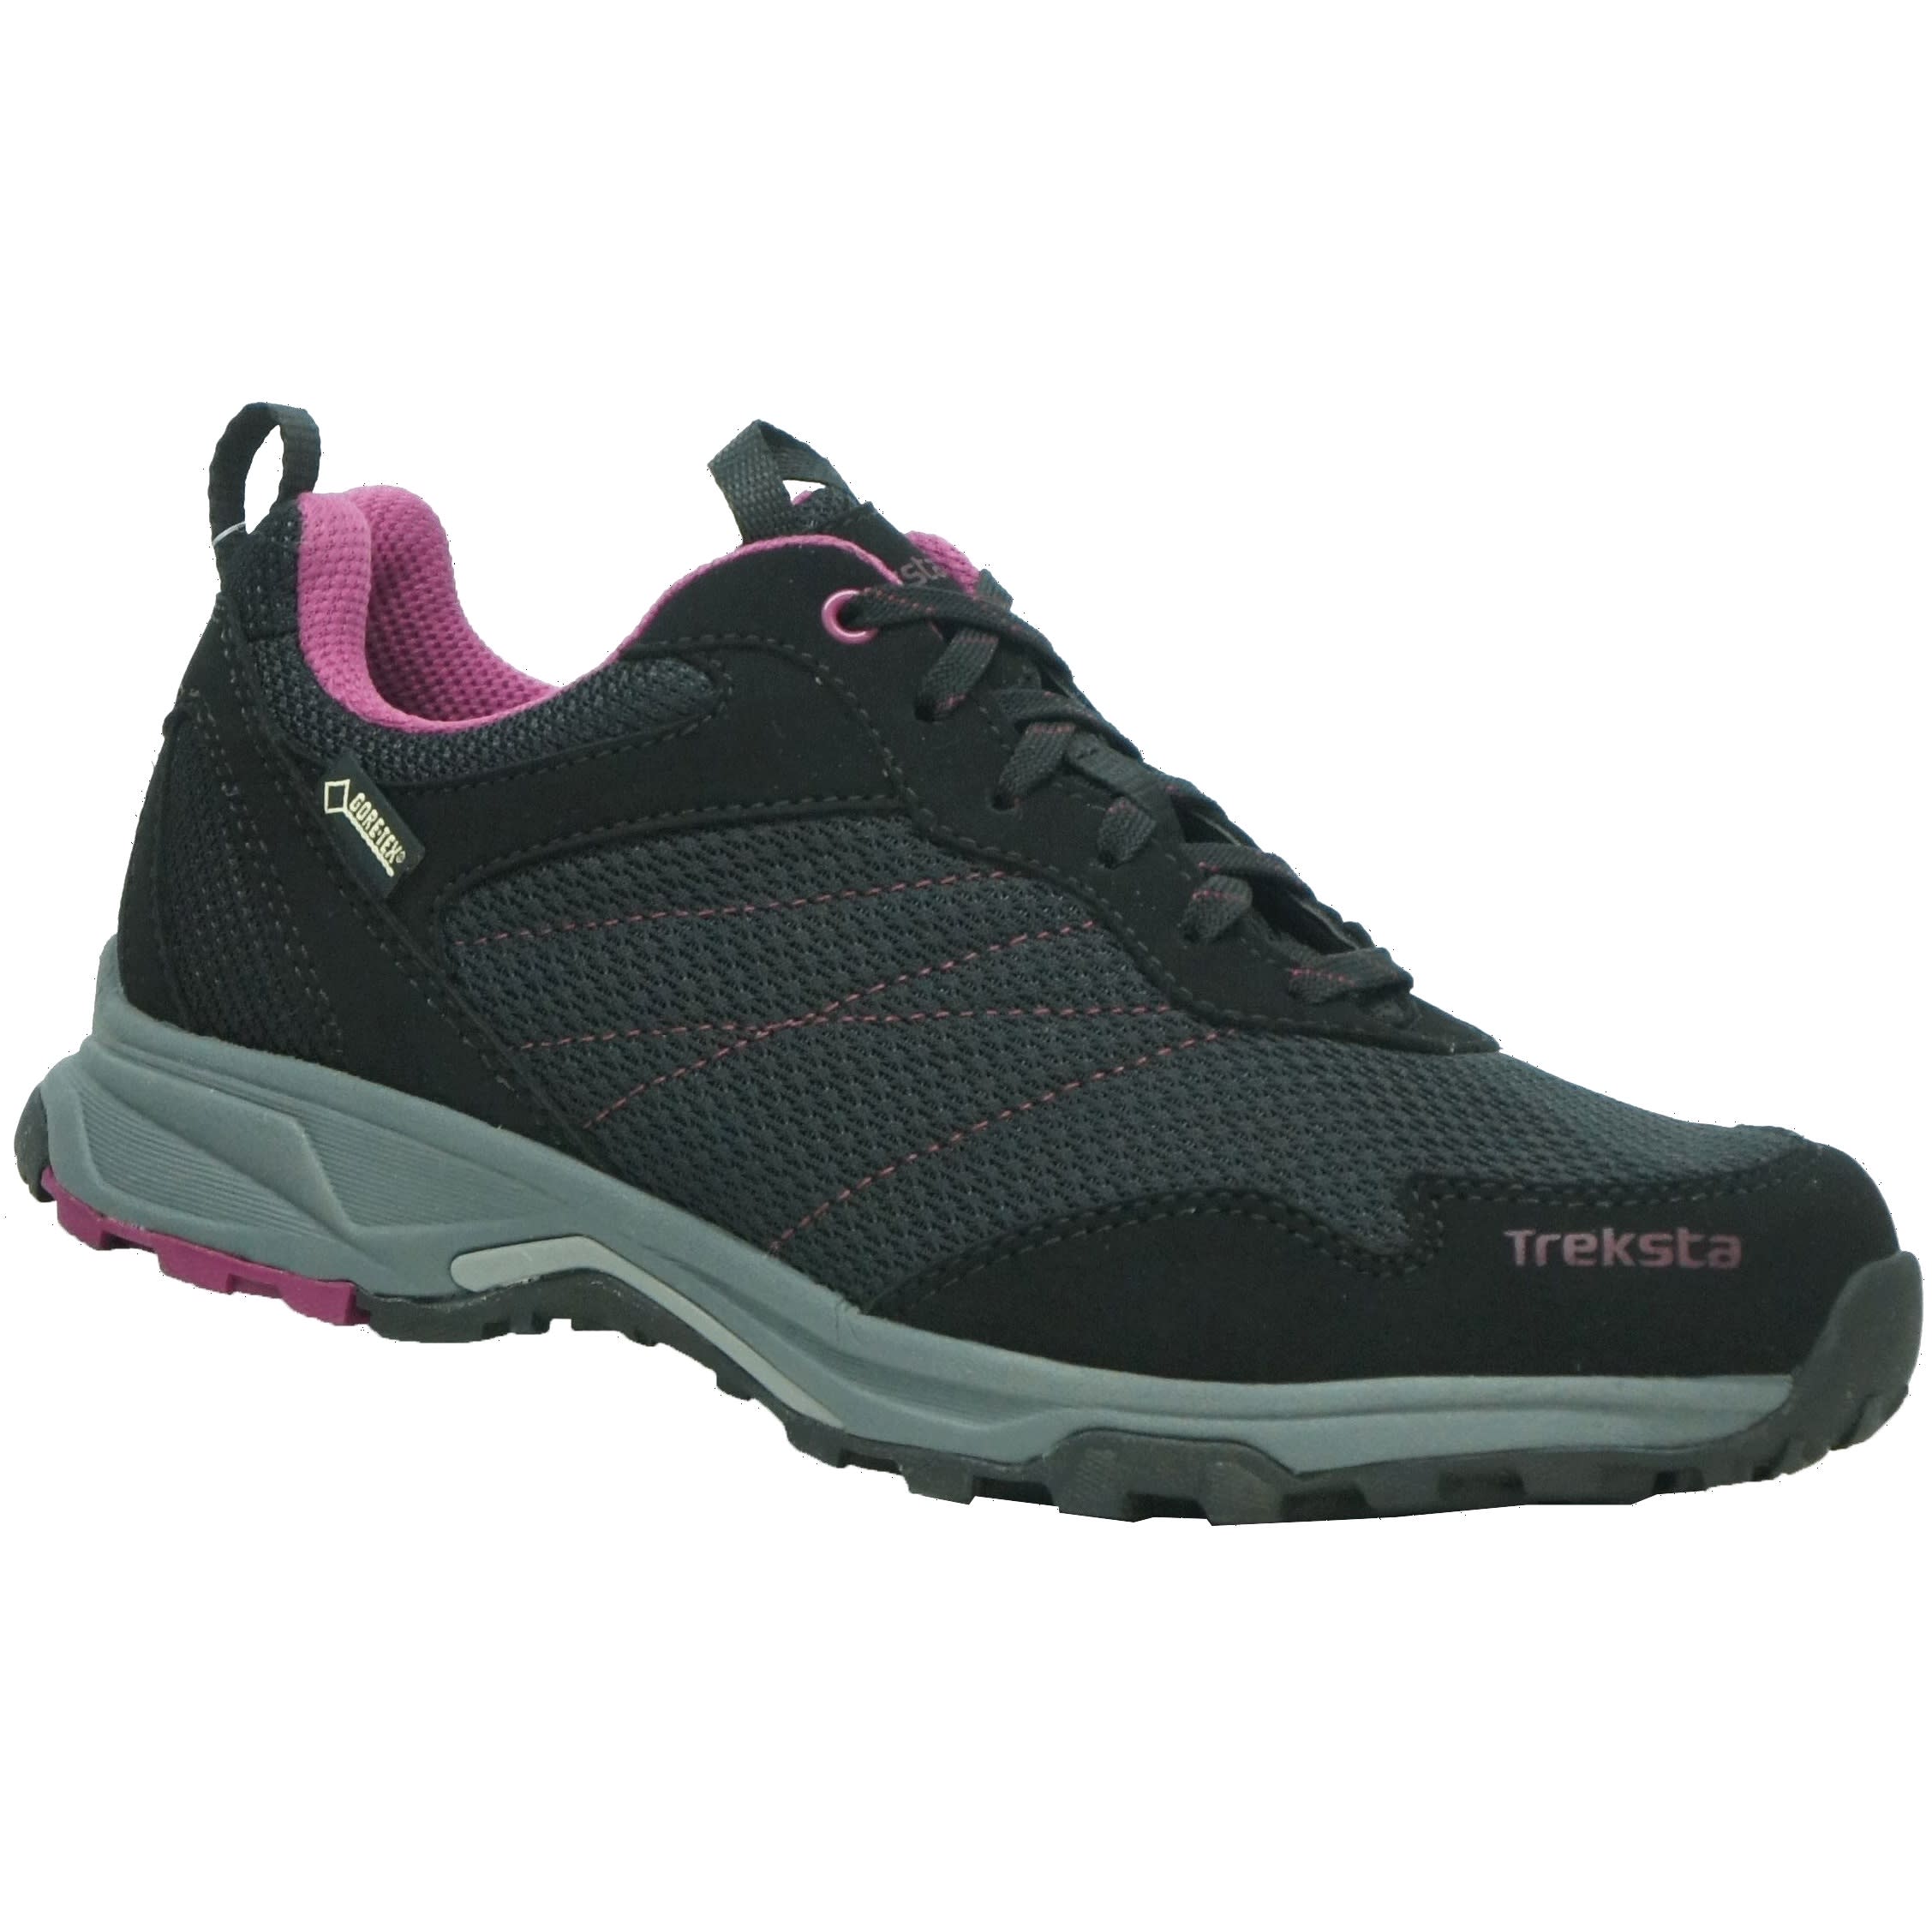 Buy TrekSta Star Lace 101 Gtx from Outnorth